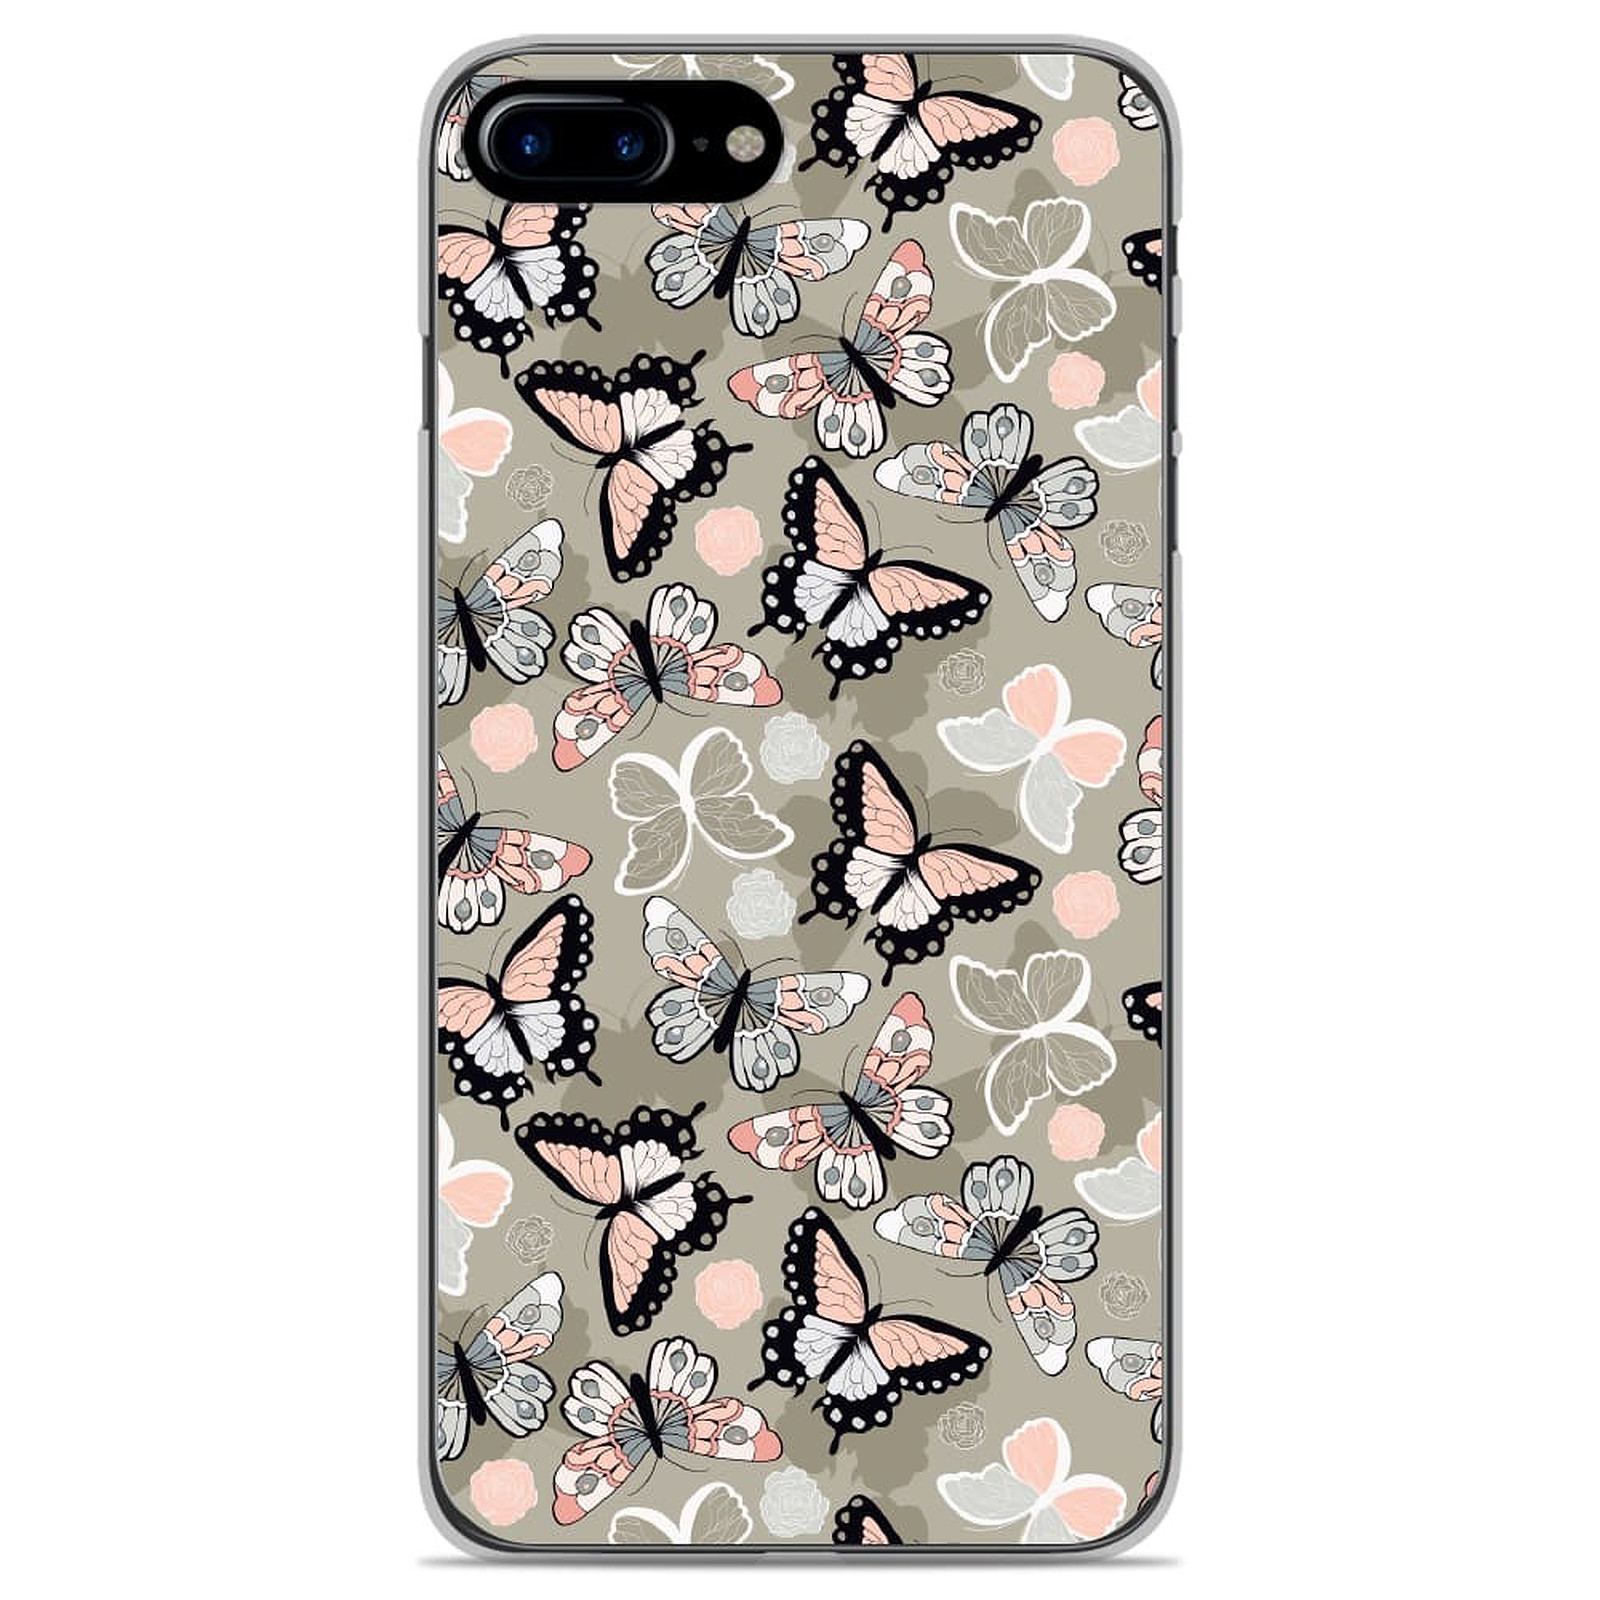 1001 Coques Coque silicone gel Apple iPhone 7 Plus motif Papillons Vintage - Coque telephone 1001Coques